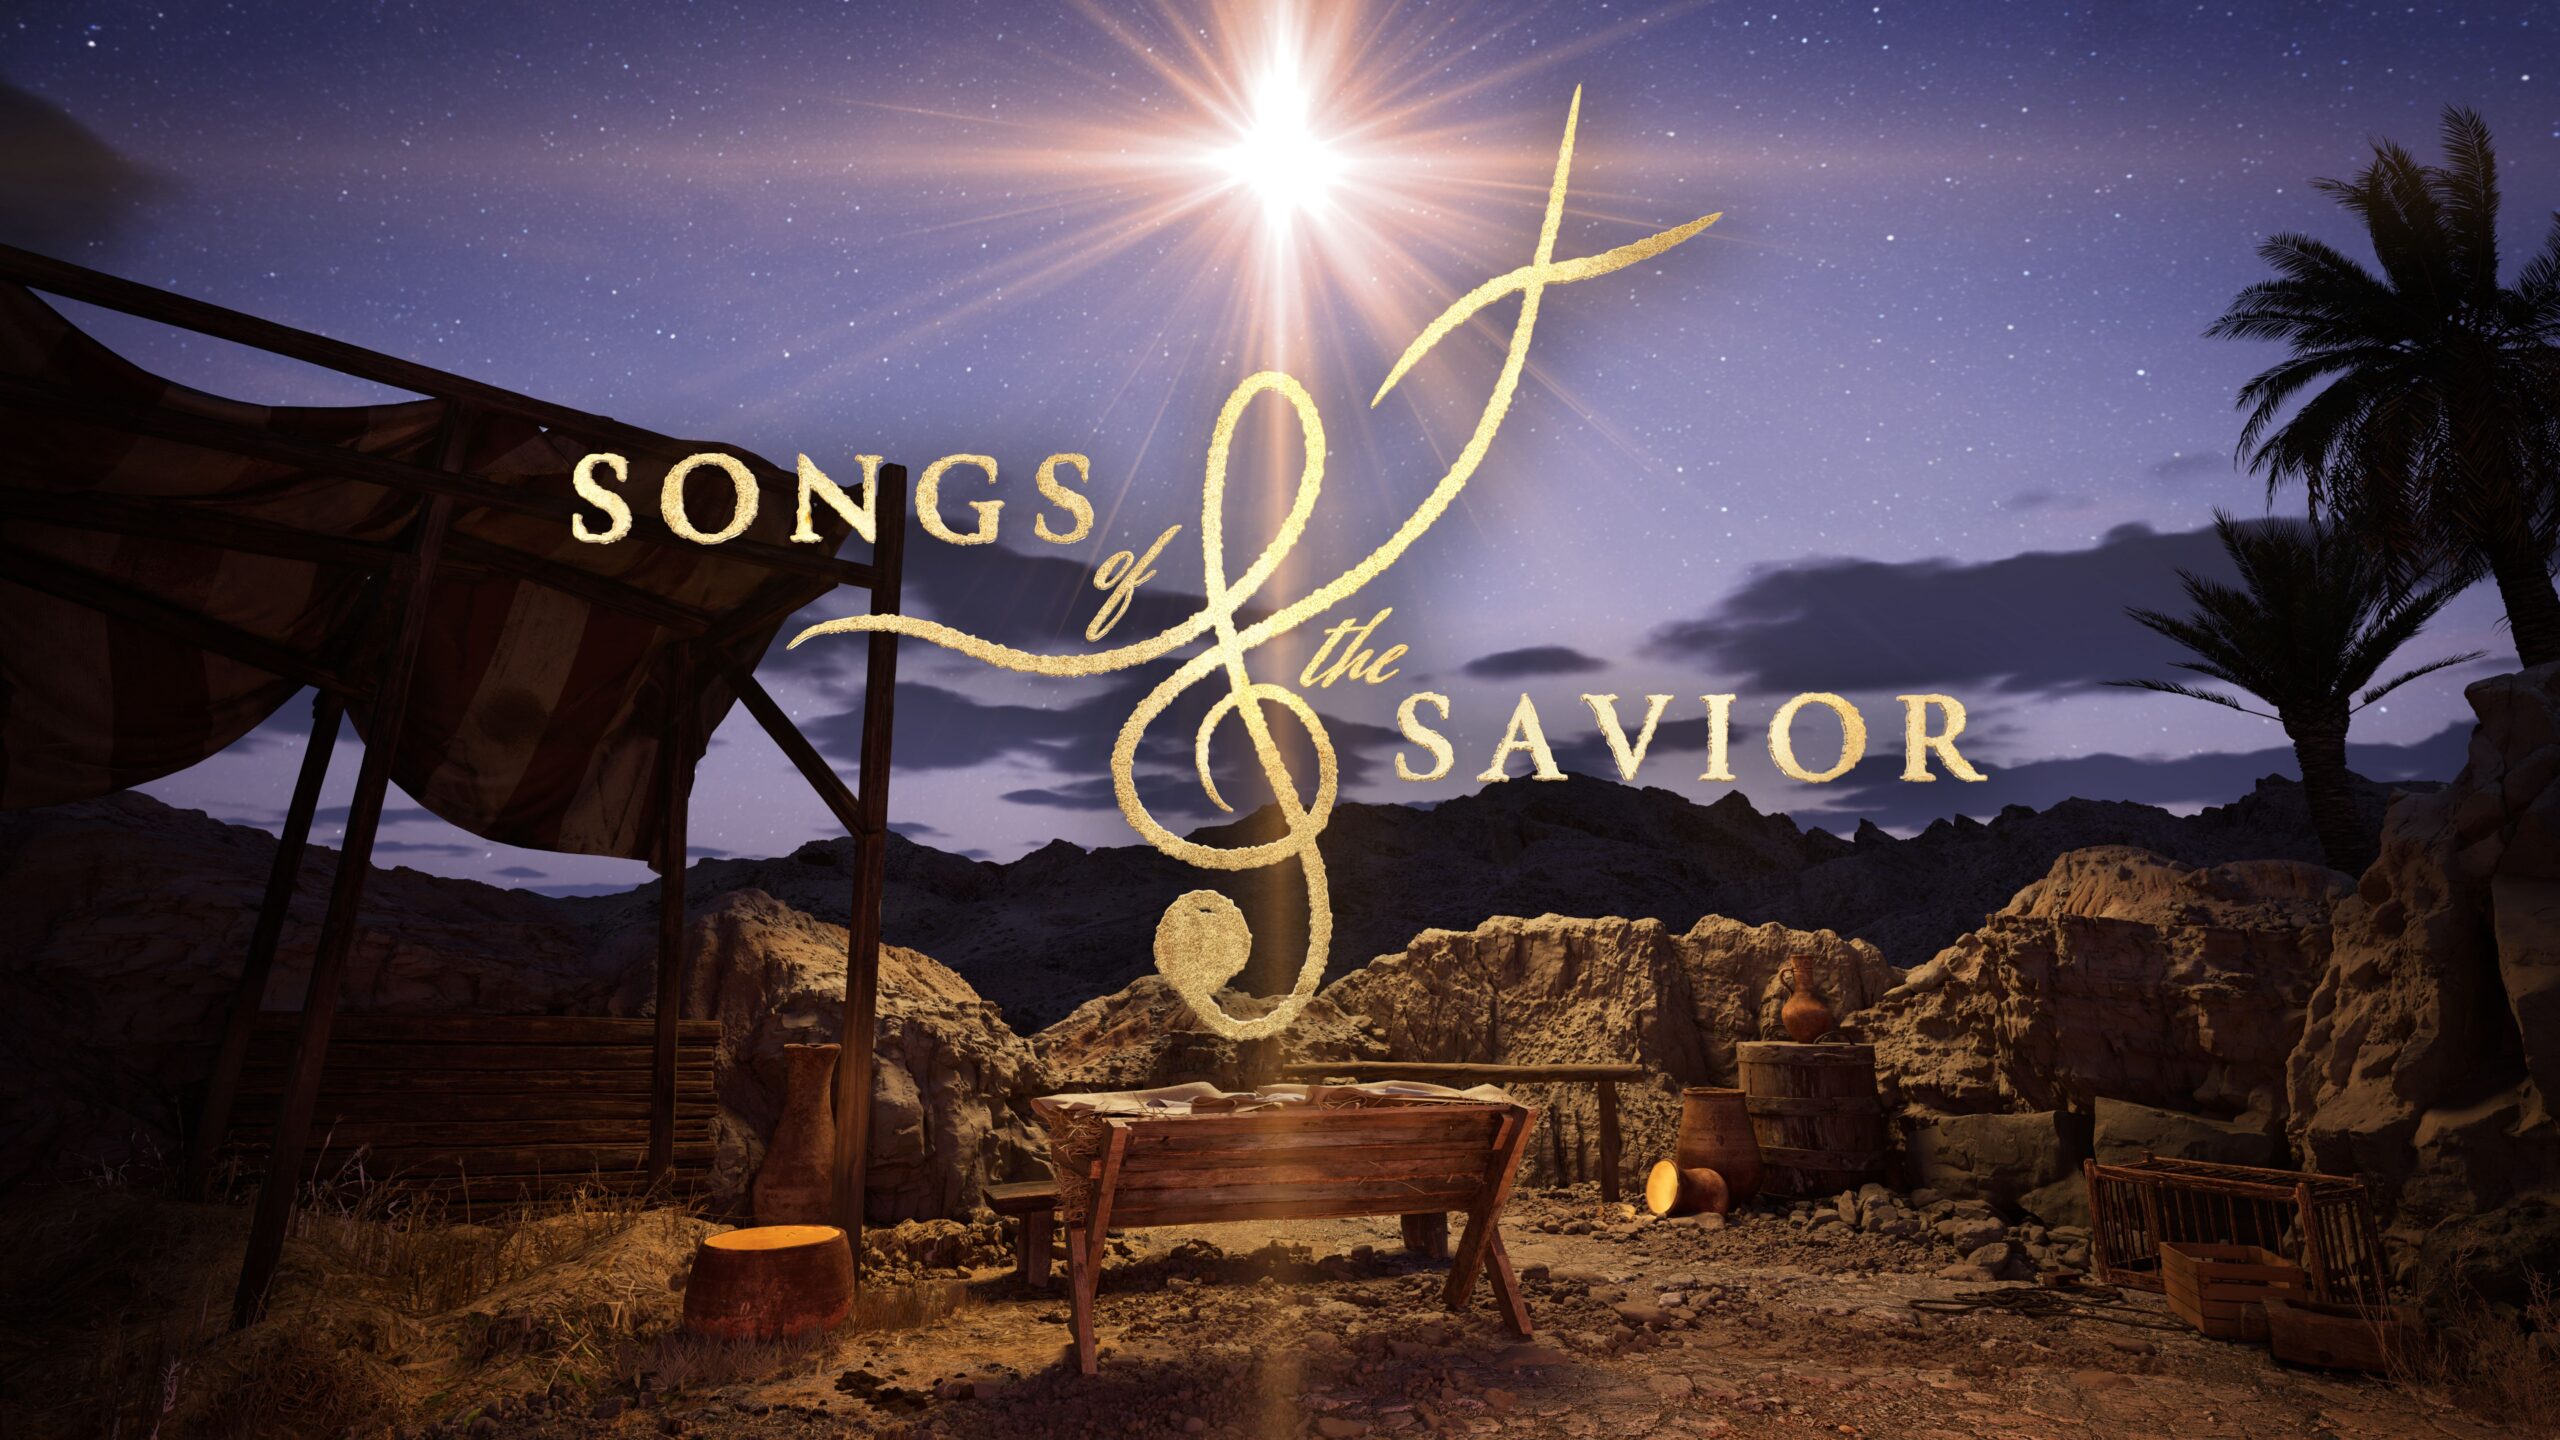 Songs of the Savior: “What Child Is This”